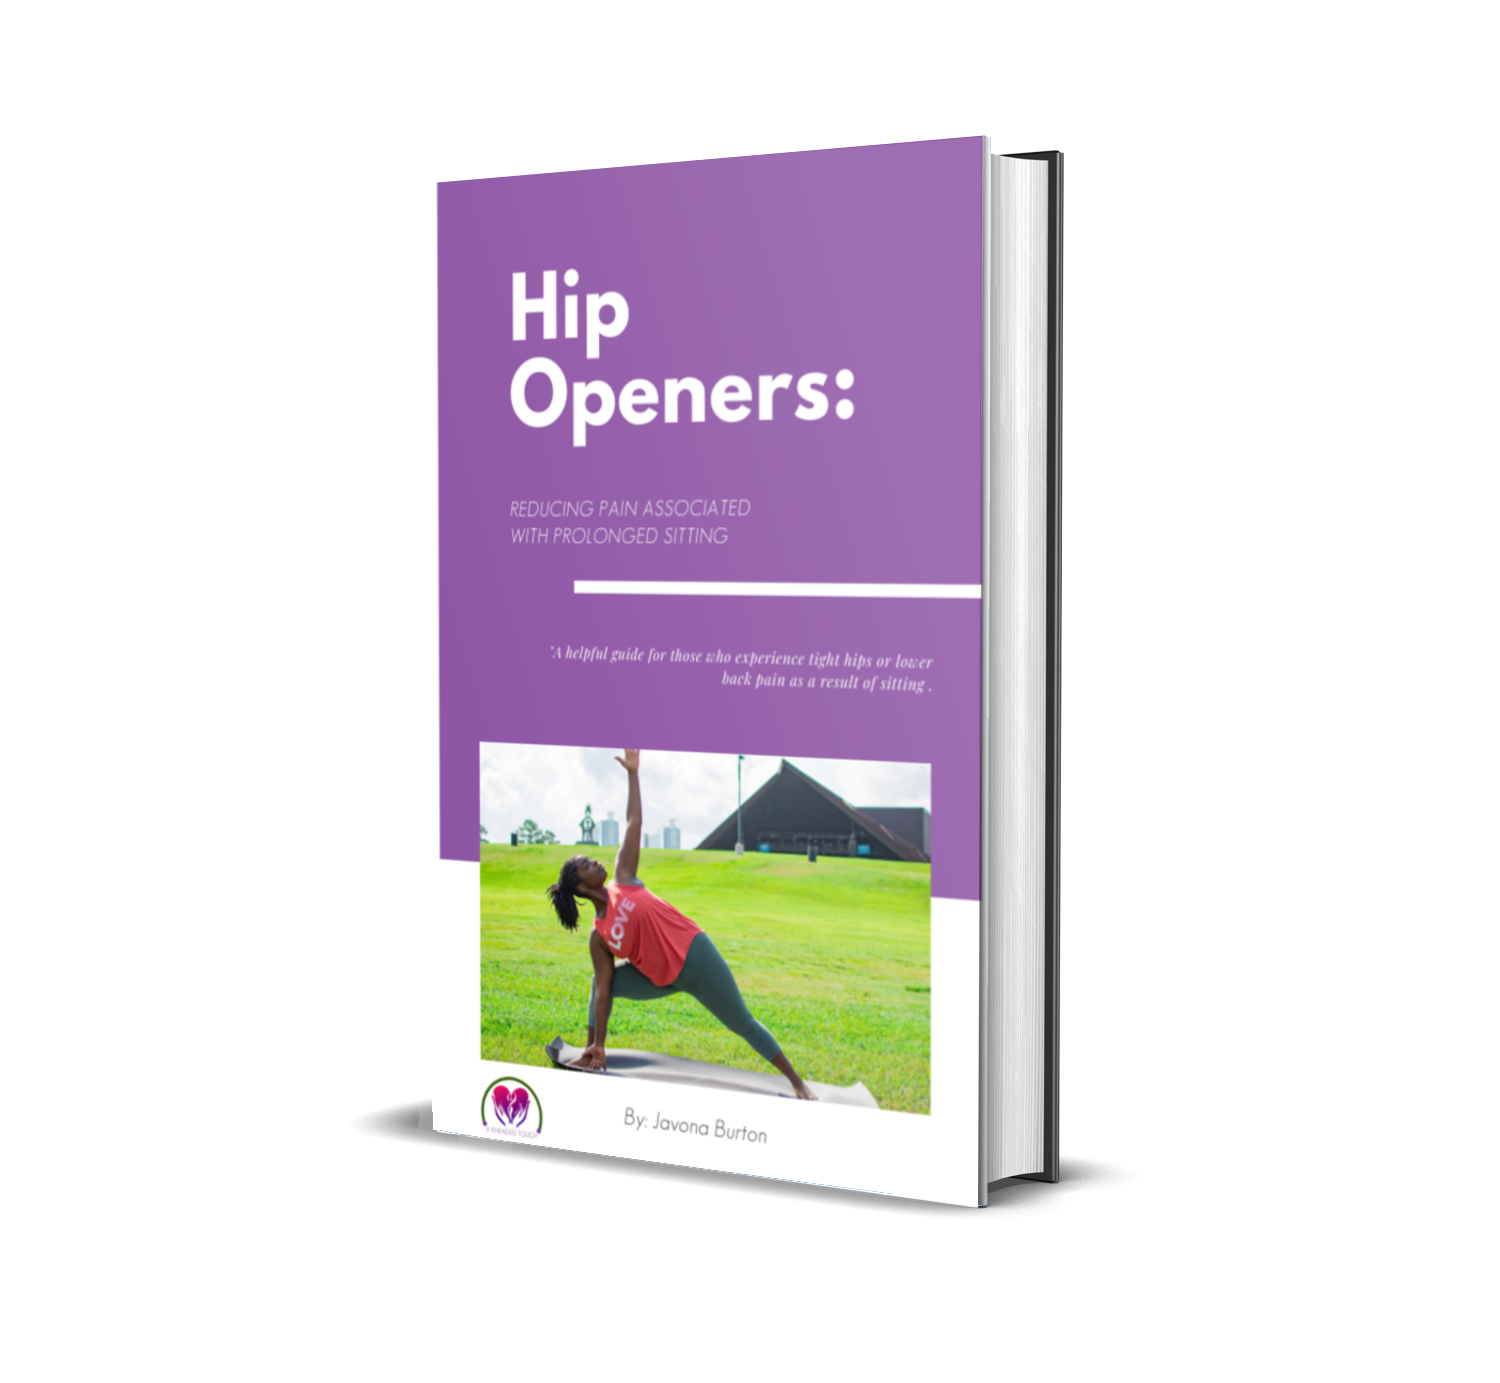 THE HIP OPENER GUIDE: REDUCING PAIN ASSOCIATED WITH PROLONGED SITTING